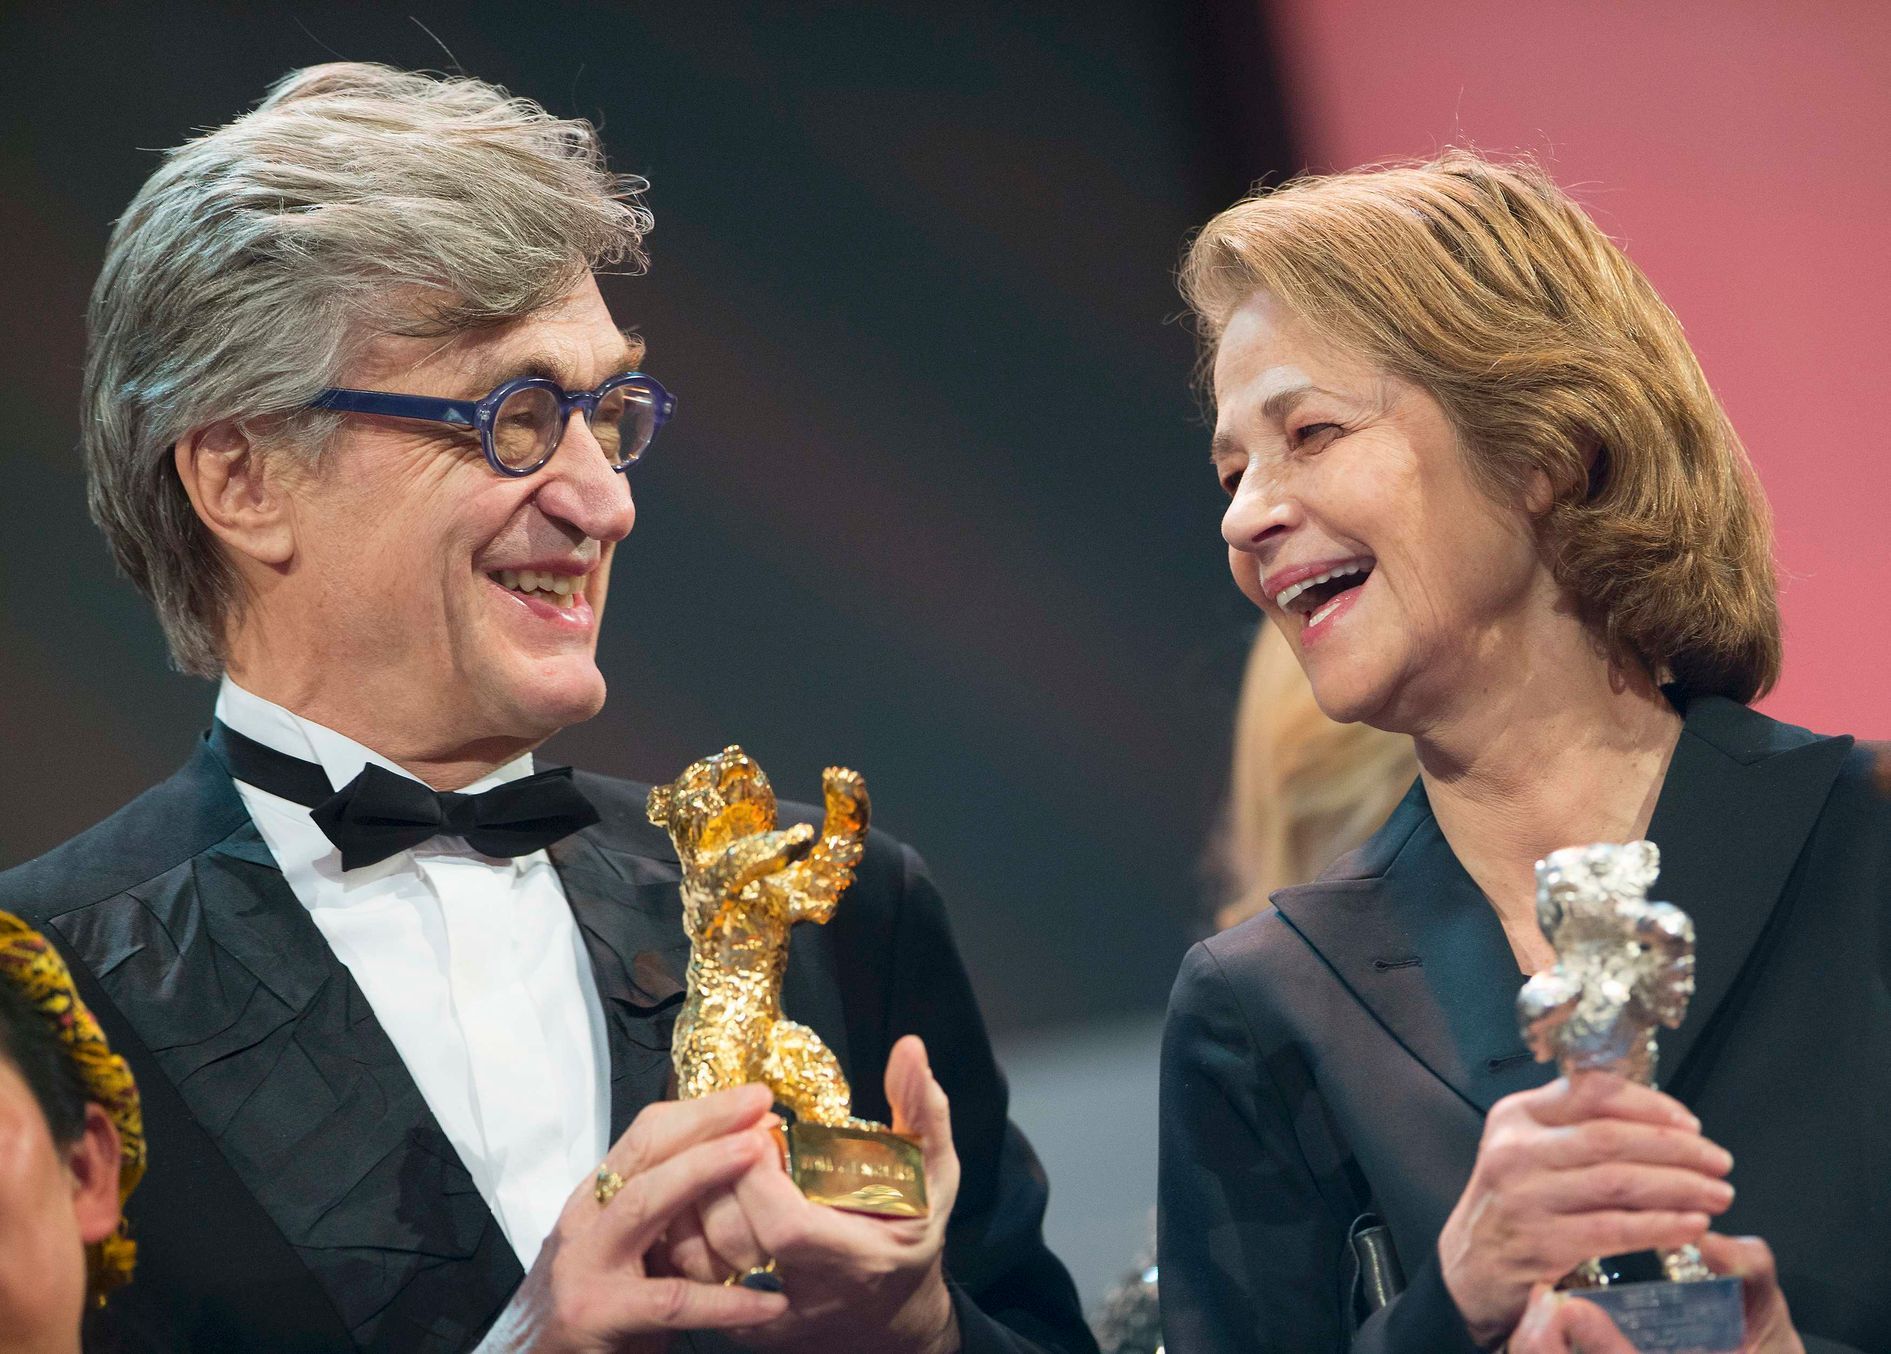 Director Wenders holds an Honorary Golden Bear next to actress Rampling holding her Silver Bear for Best Actress for the film '45 Years' at the awards ceremony of the 65th Berlinale International Film